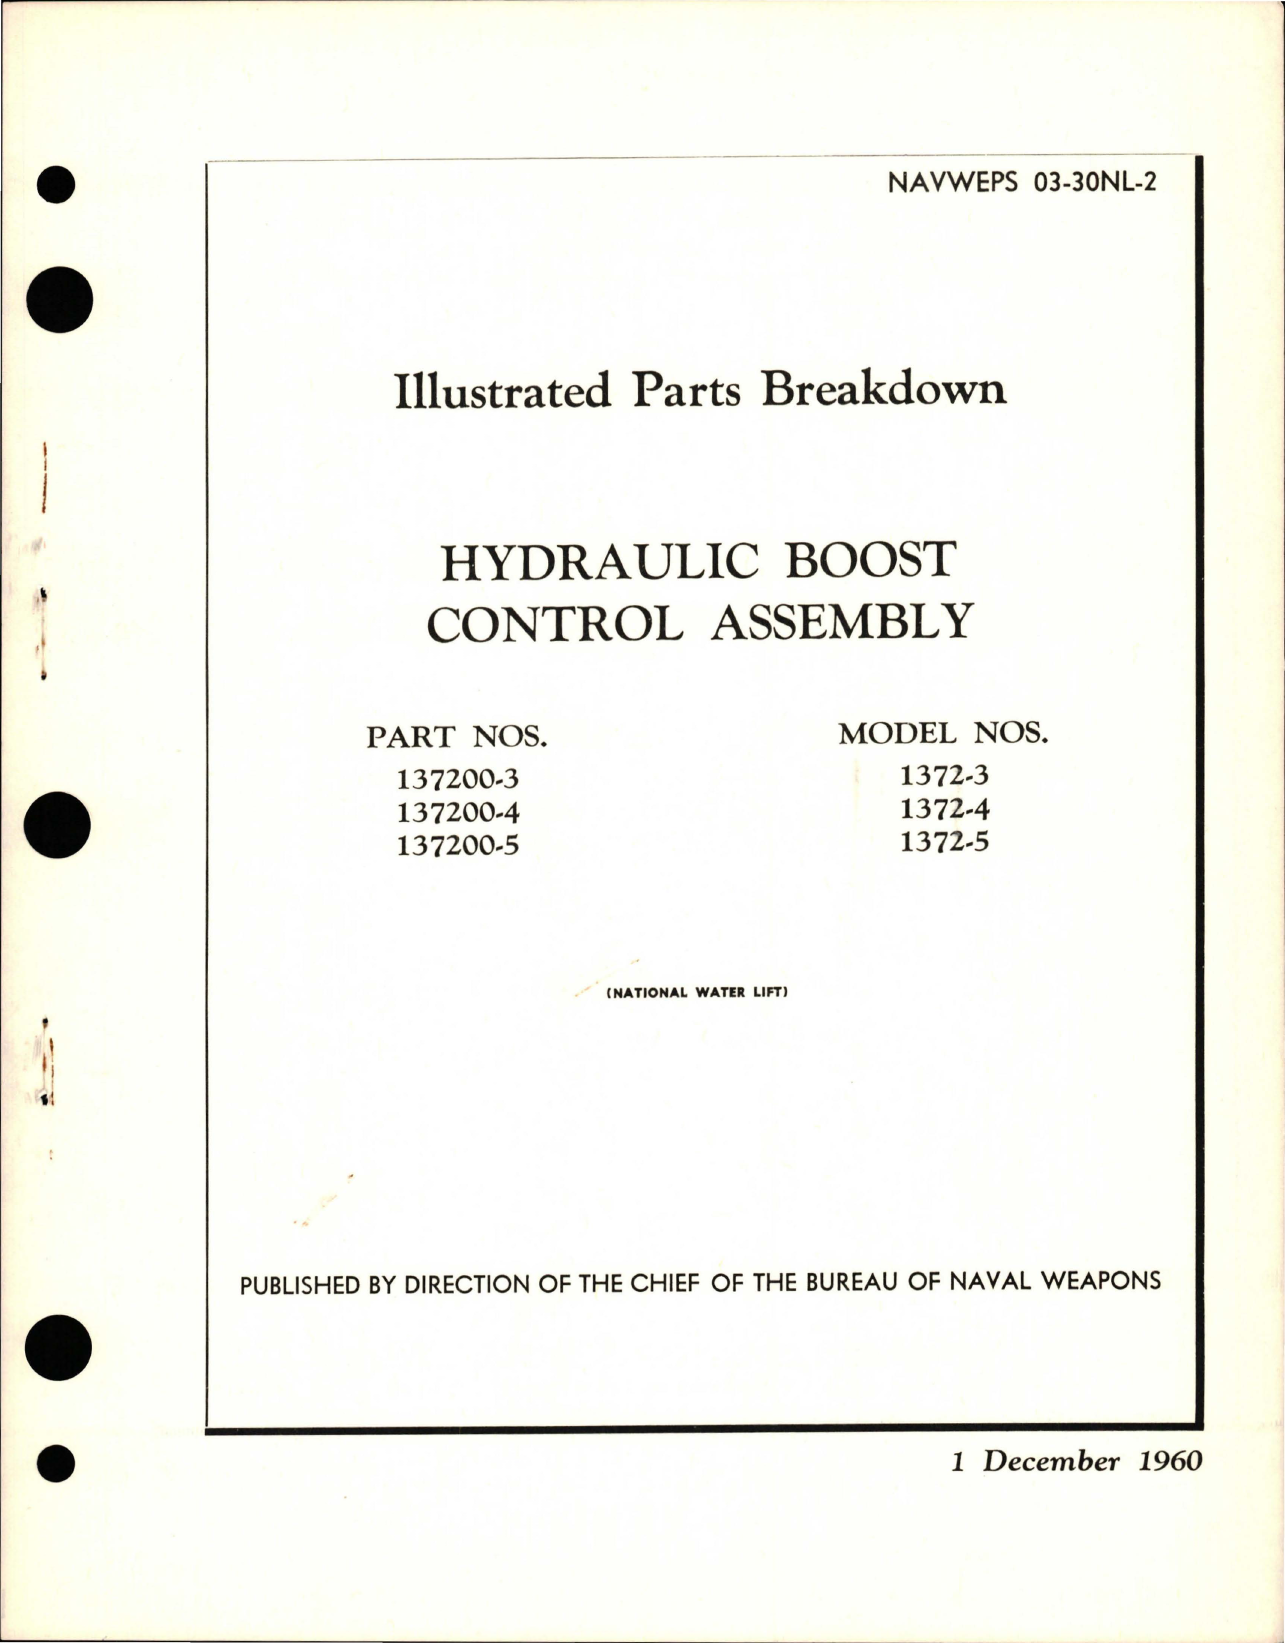 Sample page 1 from AirCorps Library document: Illustrated Parts Breakdown for Hydraulic Boost Control Assembly - Parts 137200-3, 137200-4, and 137200-5